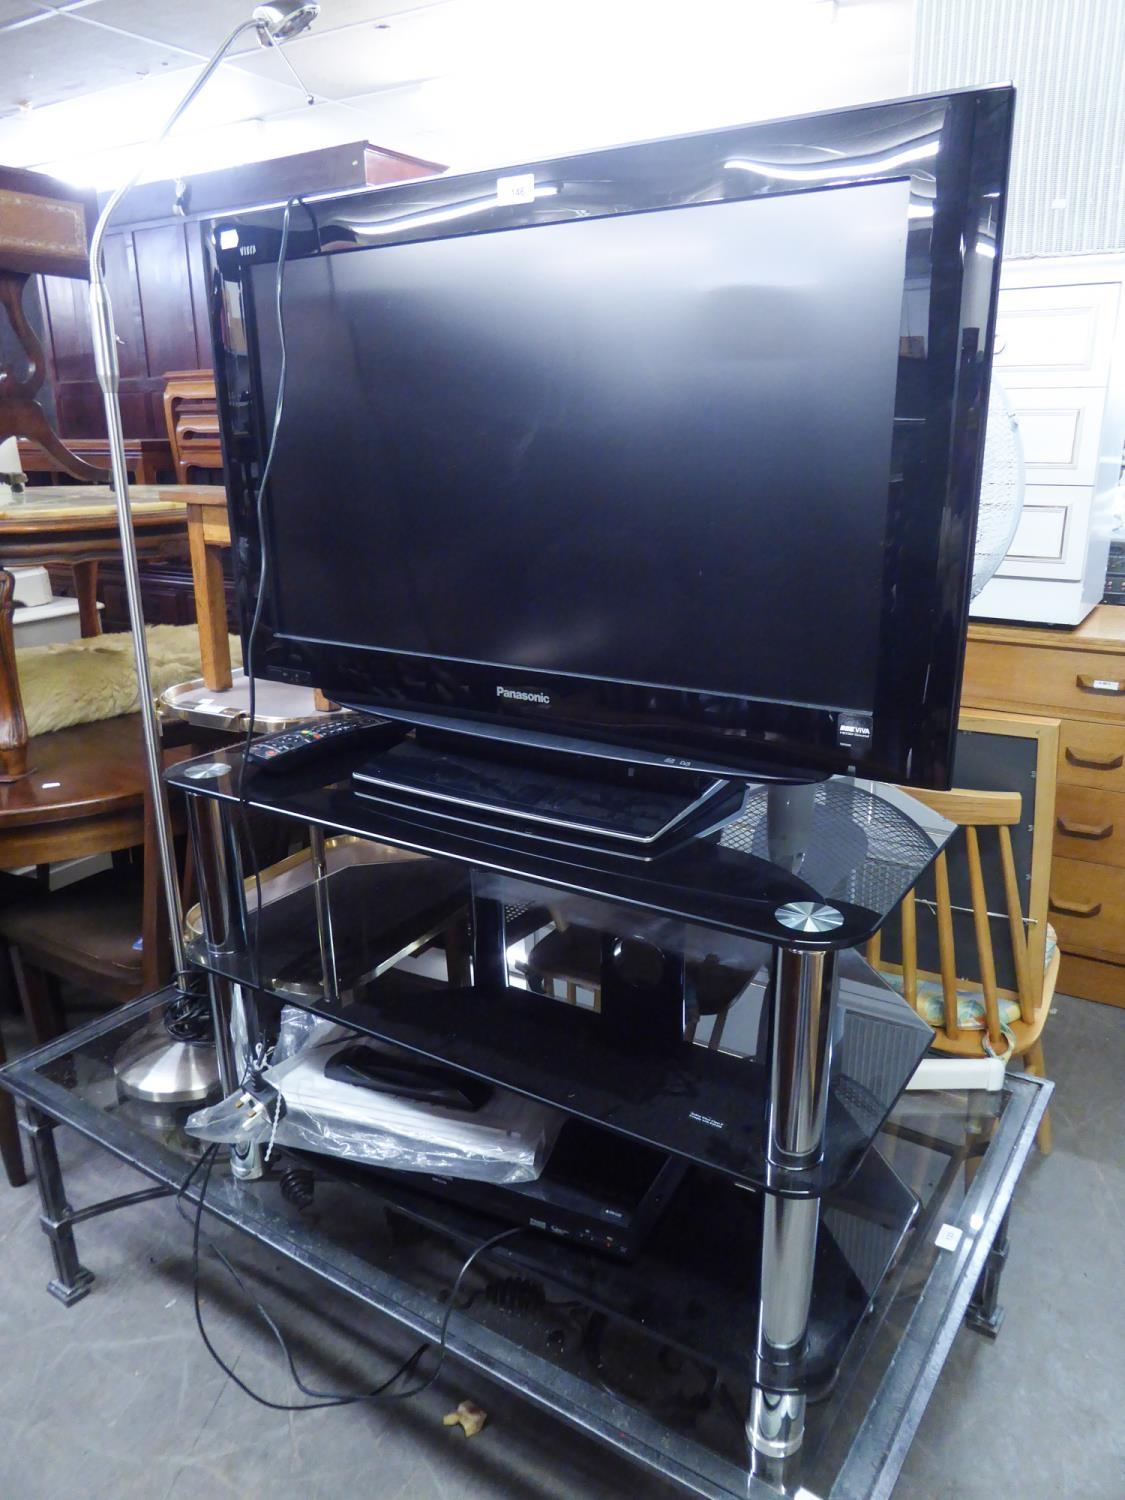 PANASONIC VIERA FLAT SCREEN TELEVISION ON BLACK GLASS, THREE-TIER STAND, WITH DVD PLAYER